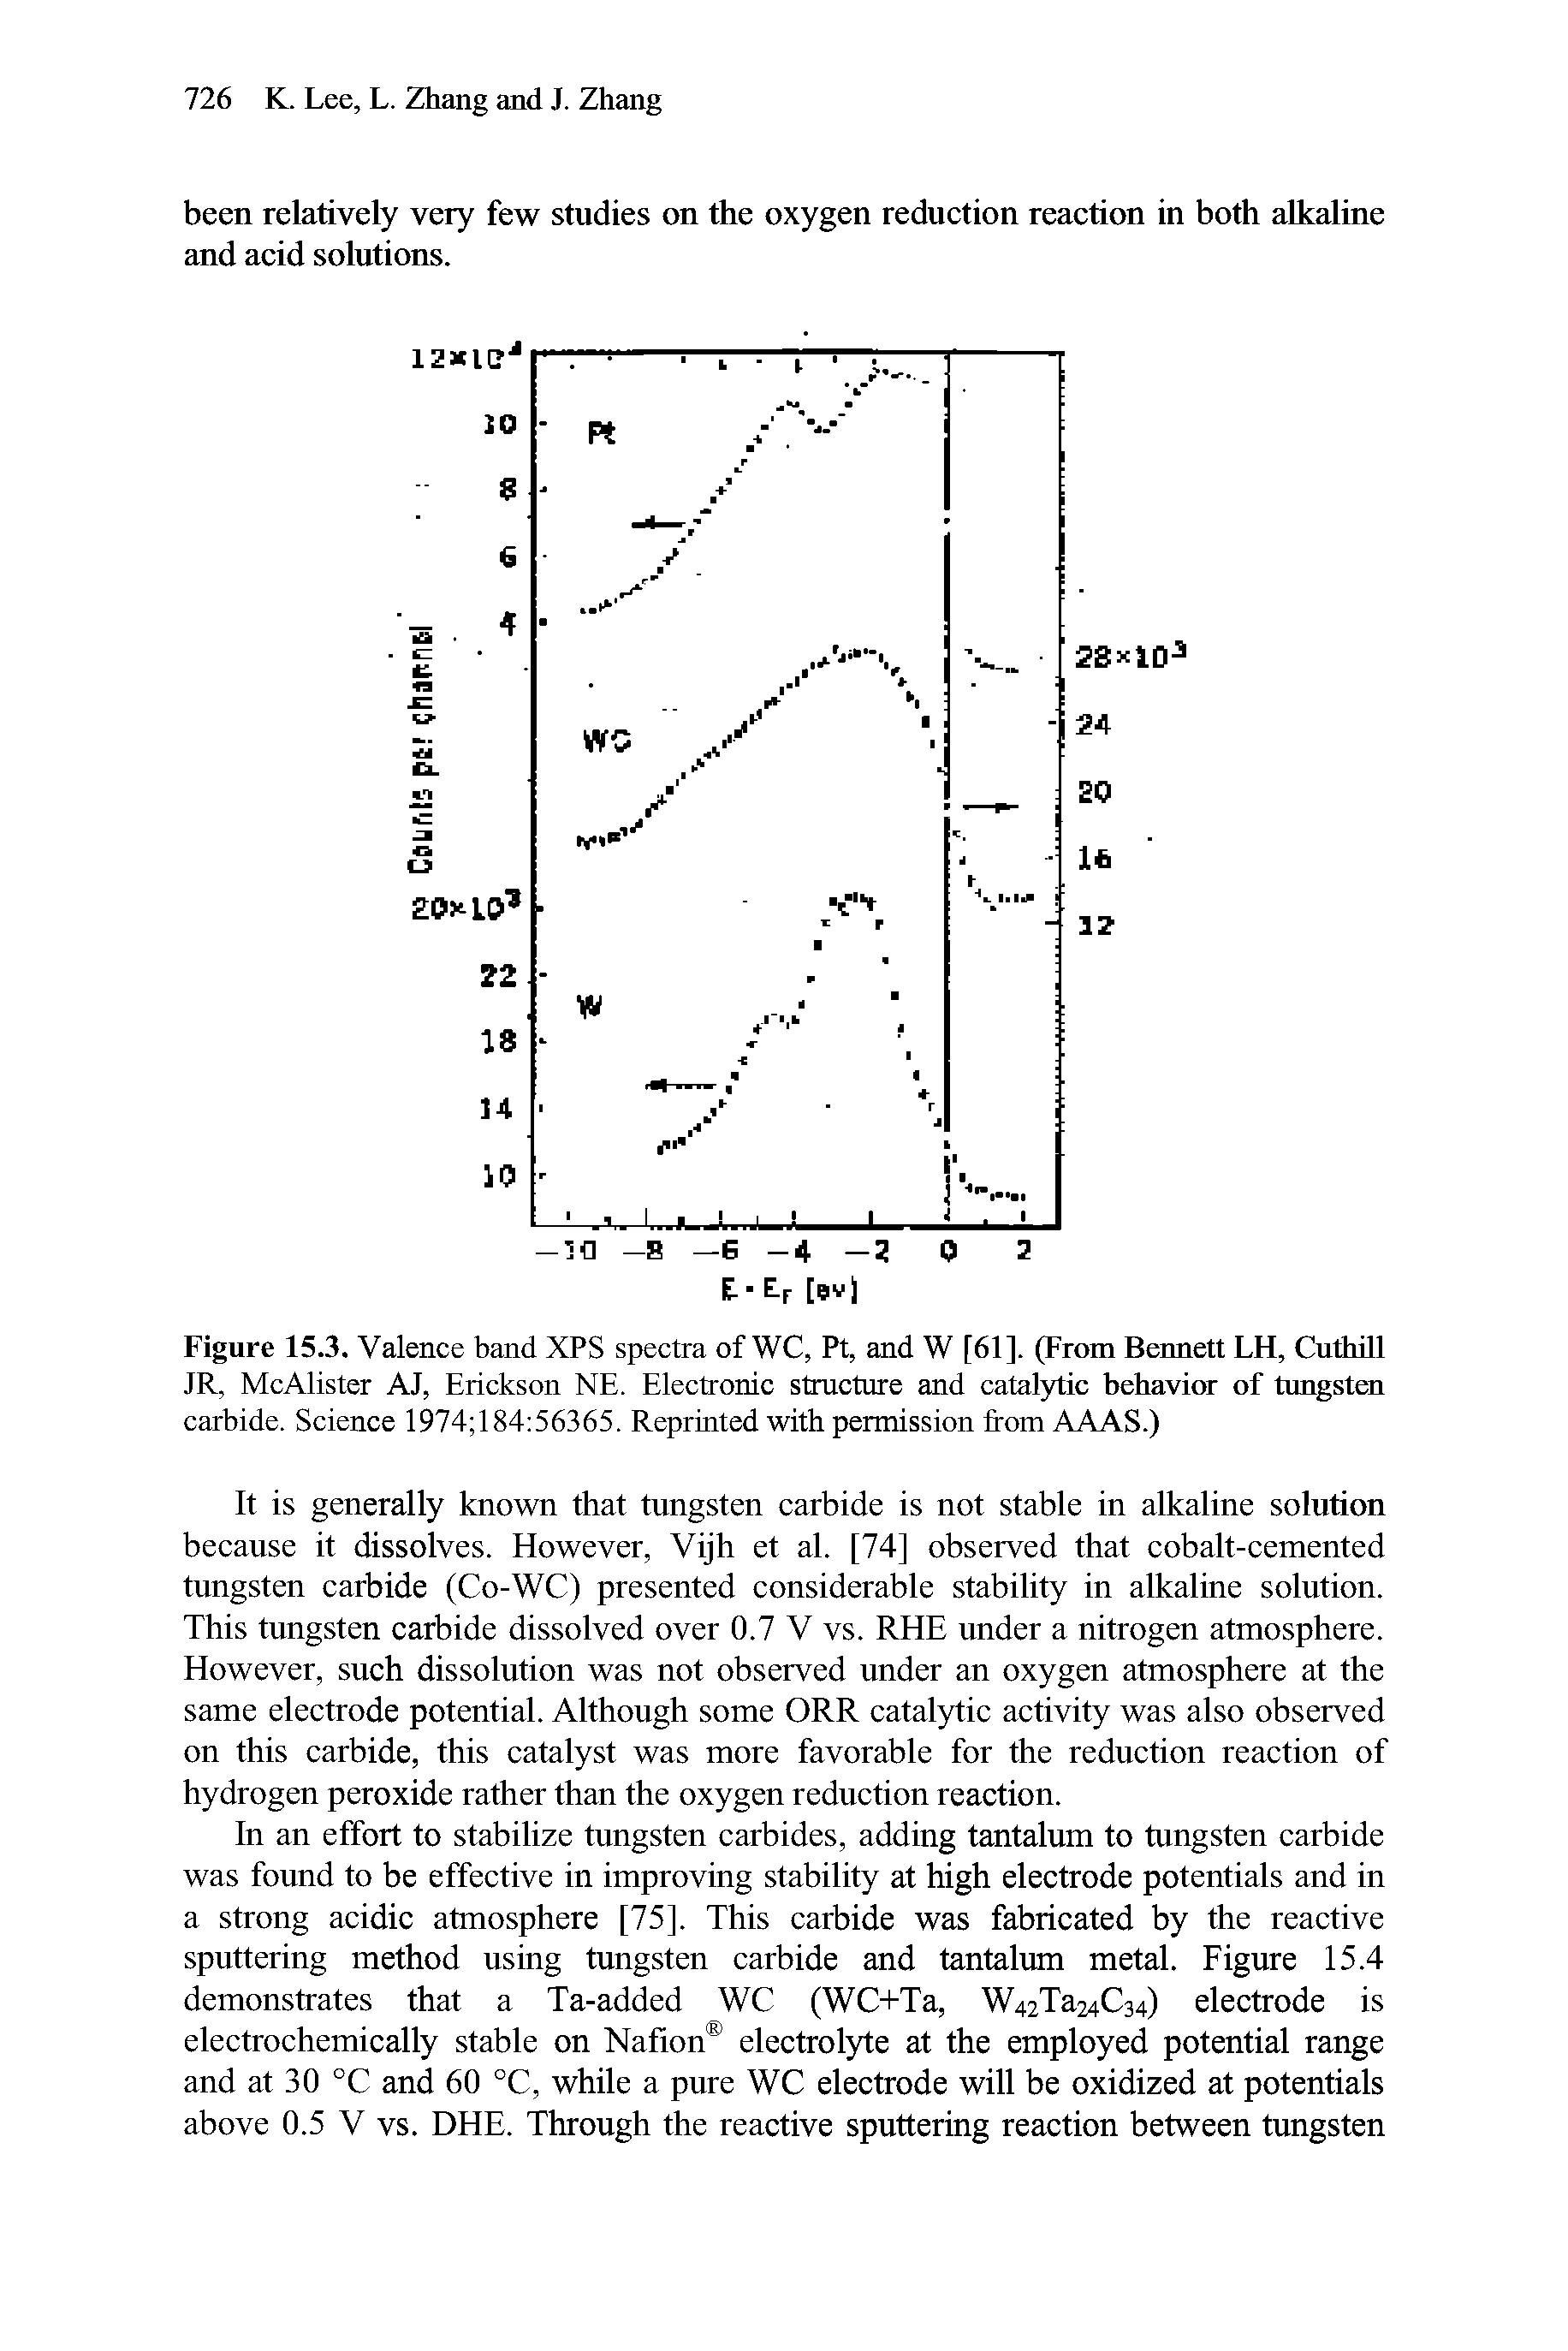 Figure 15.3. Valence band XPS spectra of WC, Pt, and W [61]. (From Beimett LH, Cuthill JR, McAlister AJ, Erickson NE. Electronic structure and catalytic behavior of tungsten carbide. Science 1974 184 56365. Reprinted with permission from AAAS.)...